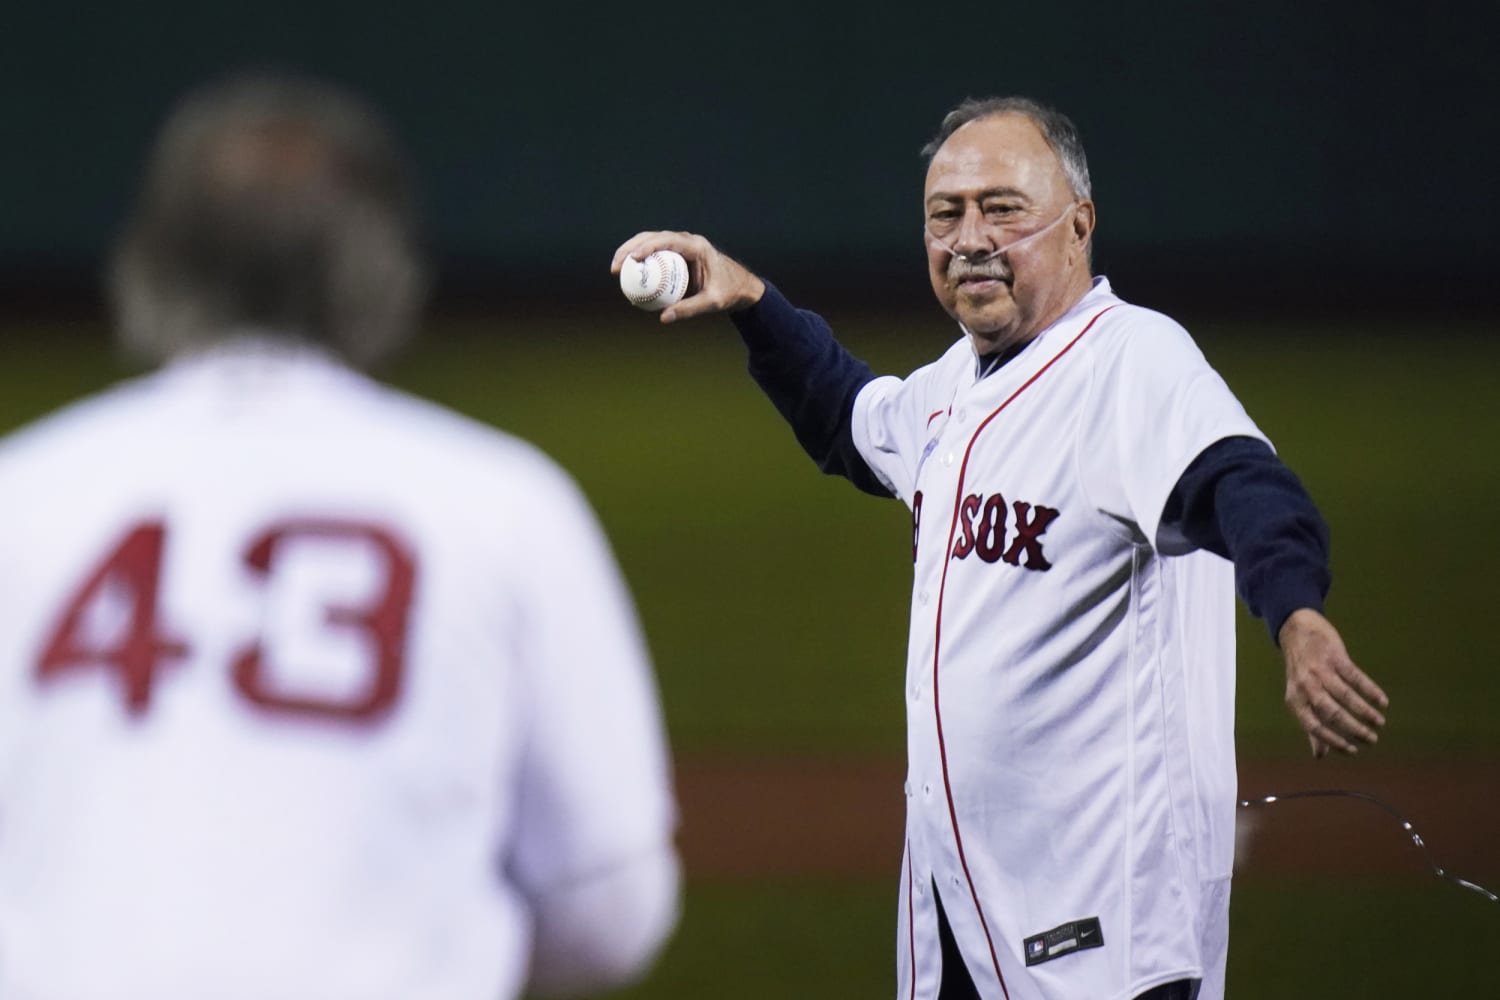 Red Sox analyst Jerry Remy declares he's “cancer free